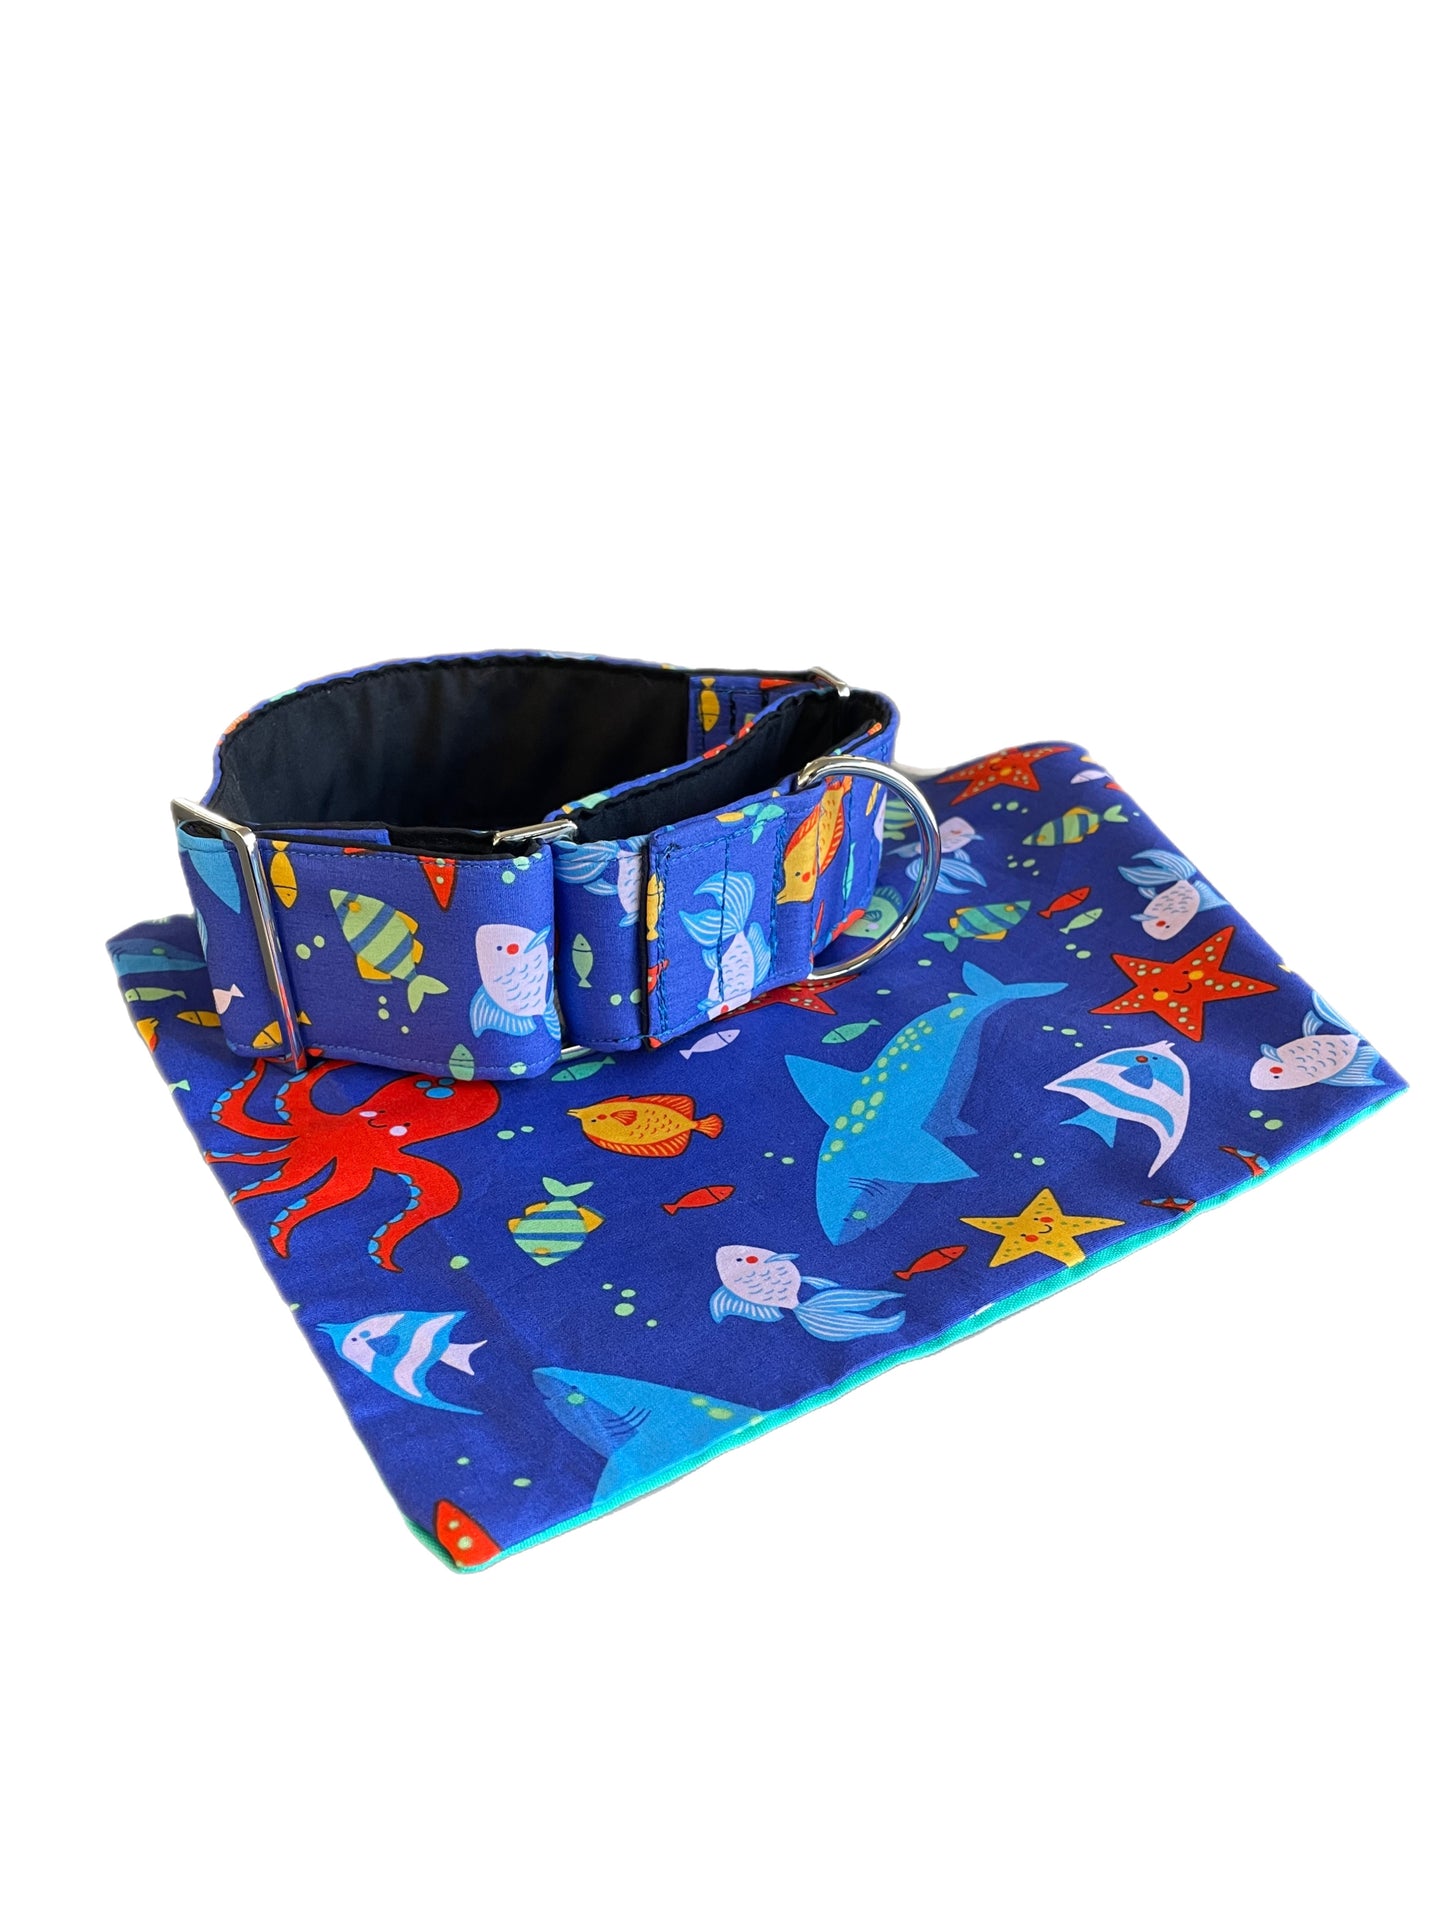 Little fishy Greyhound Martingale collar cotton covered 50mm width super soft